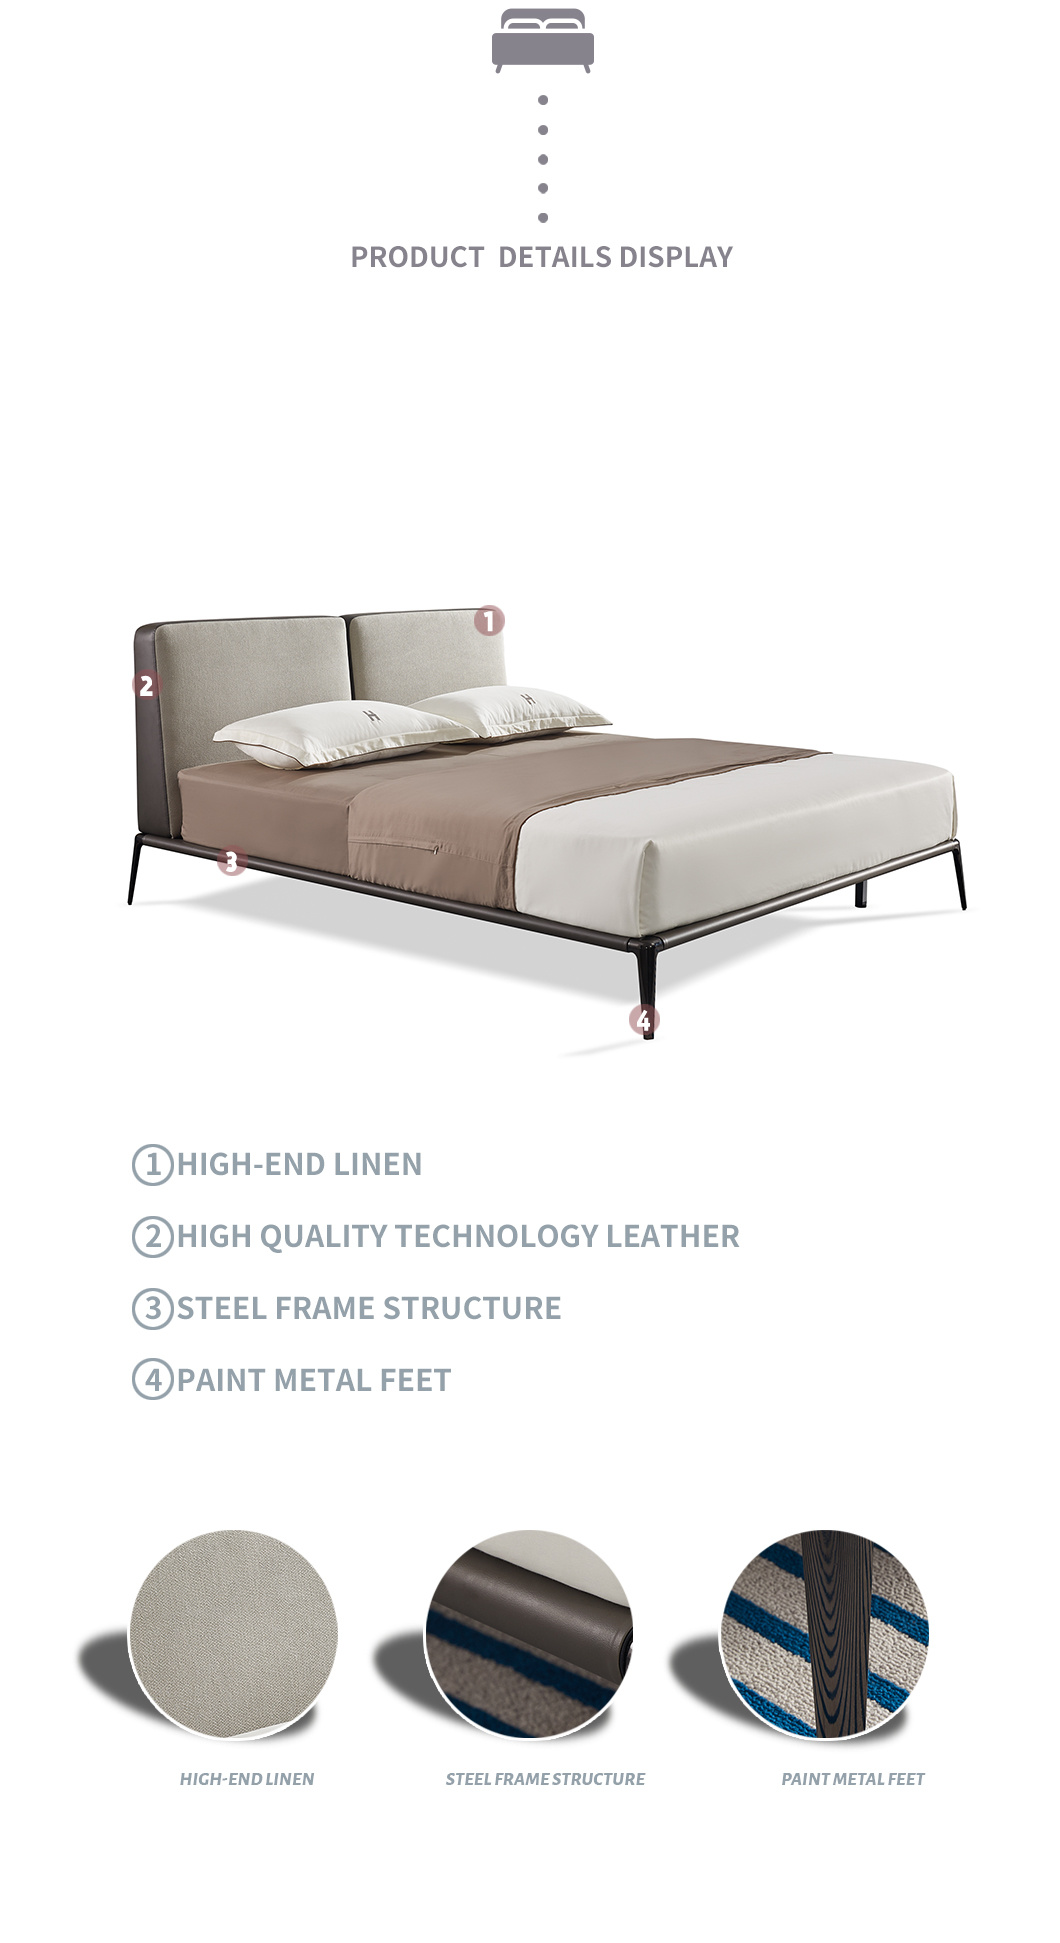 2022 New Design High Quality Technology Leather Bedroom Bed